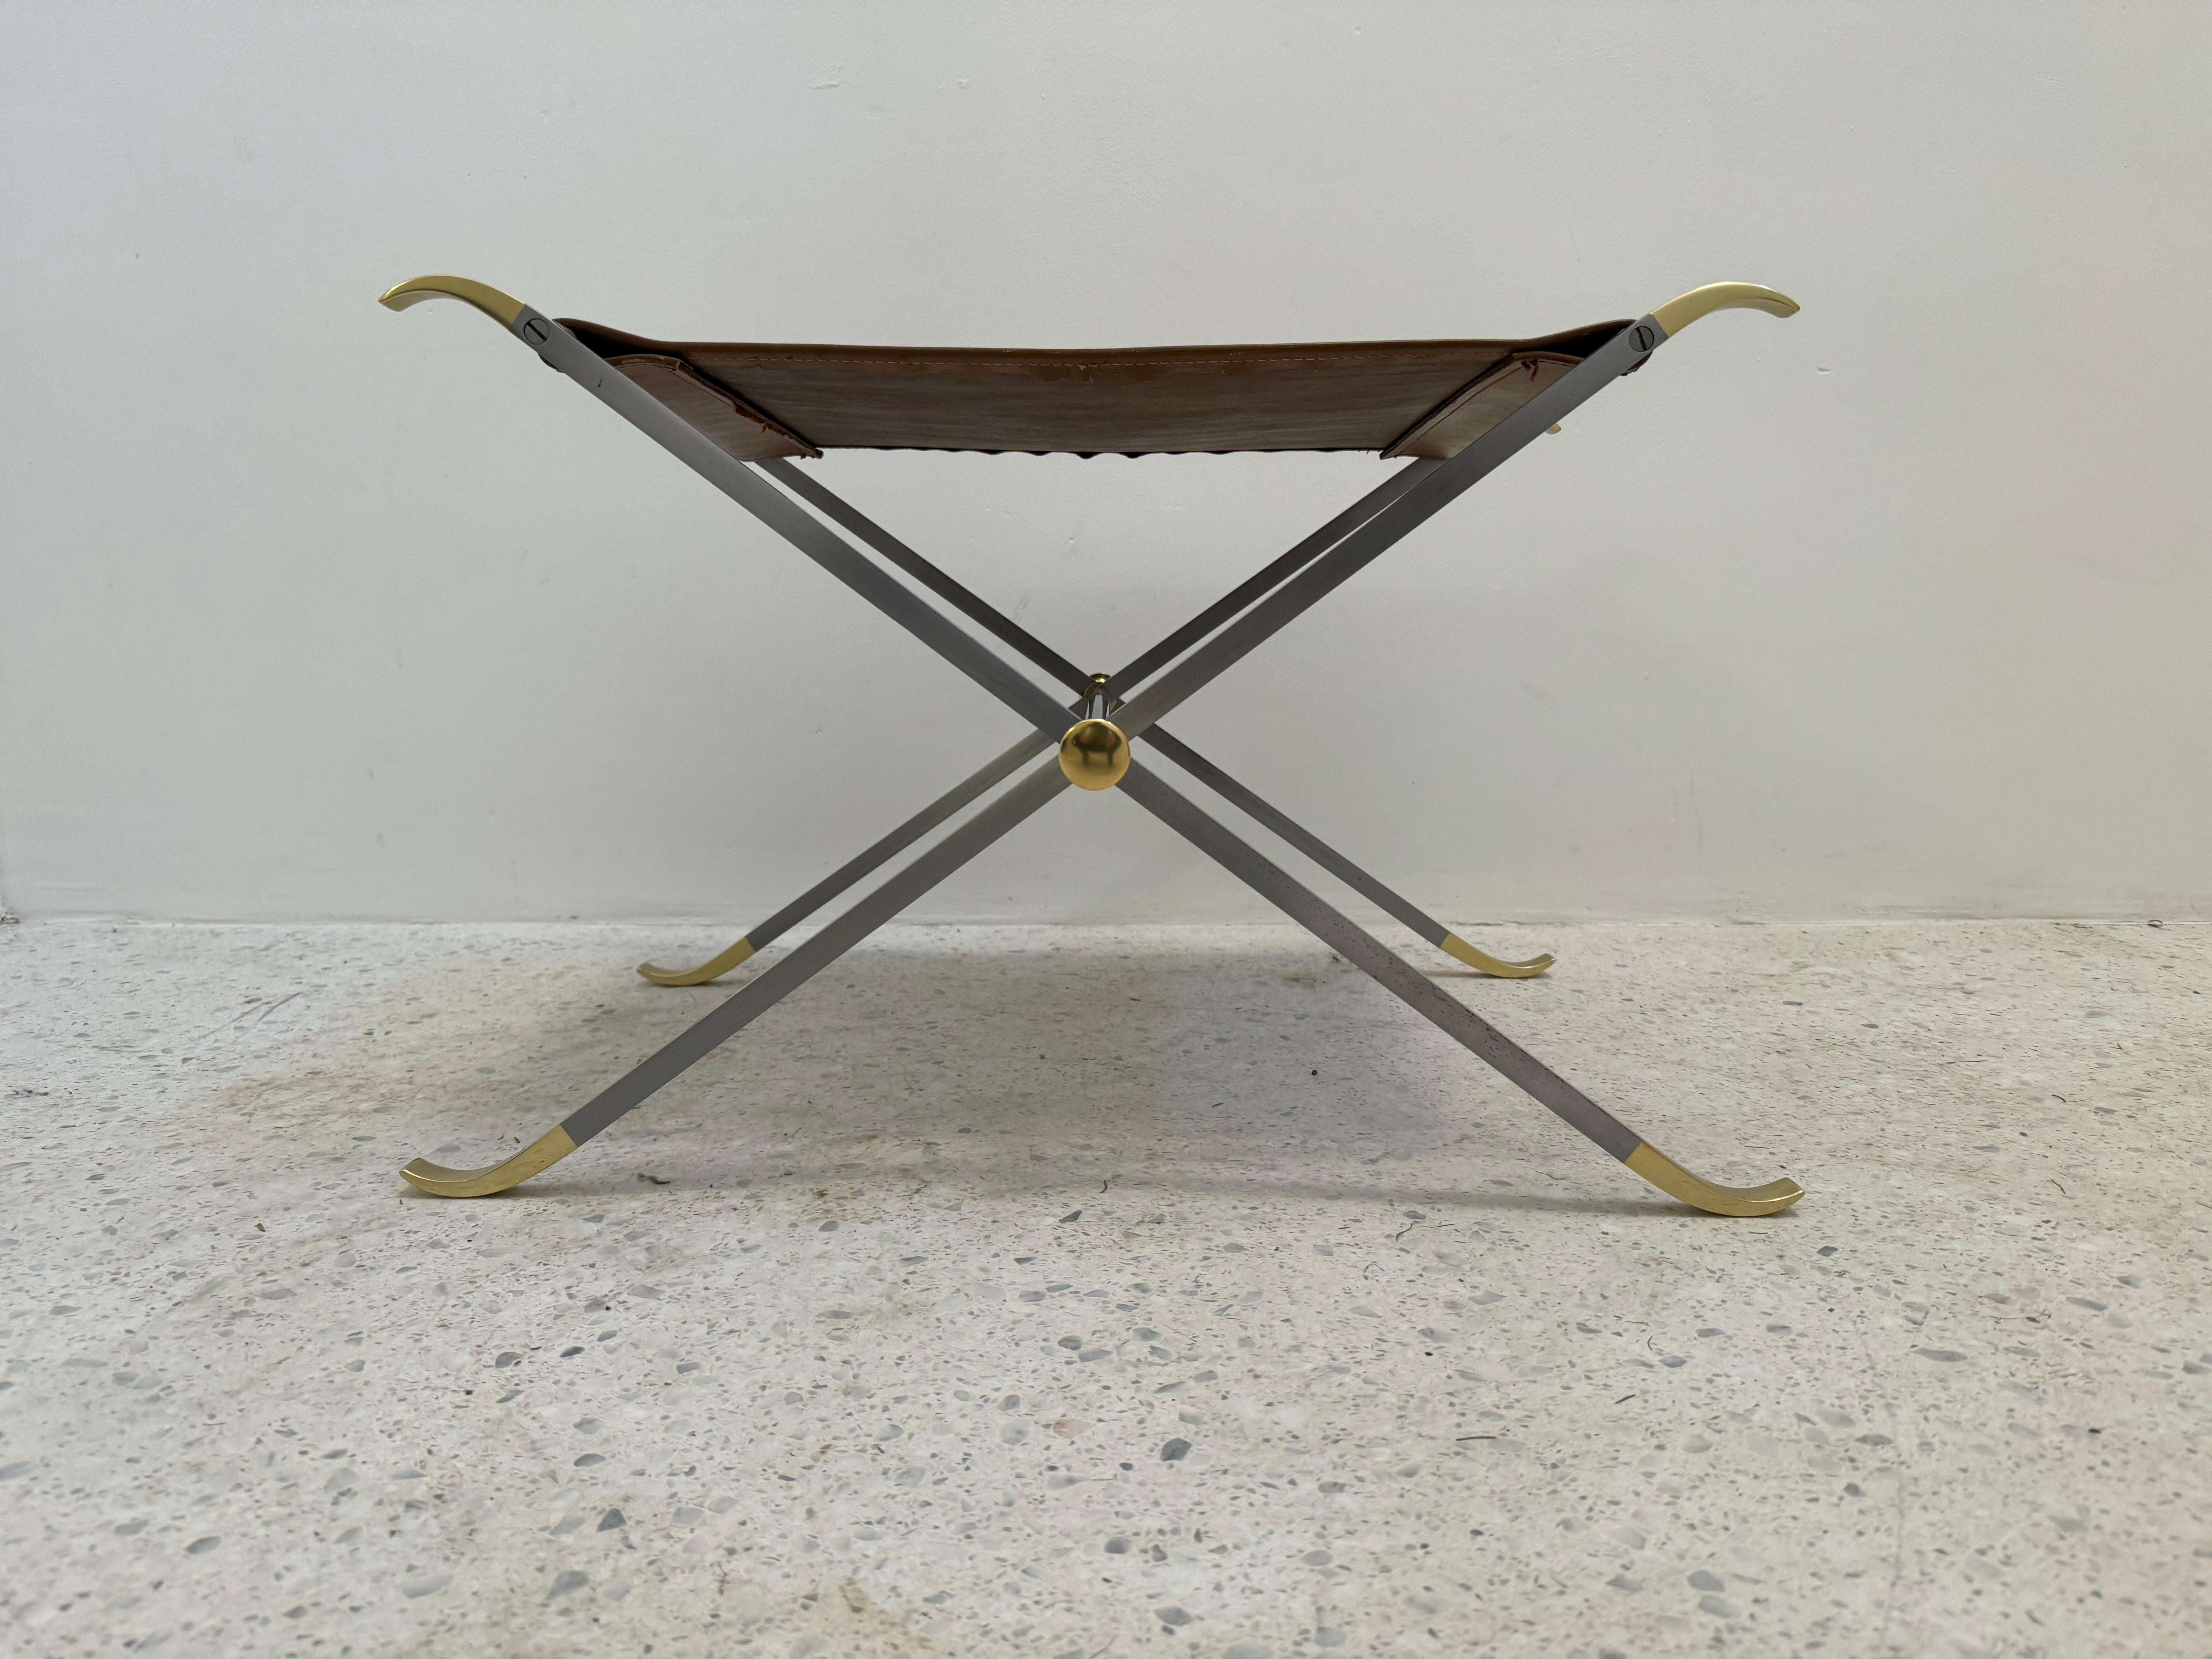 Very elegant stool by an iconic French design house.